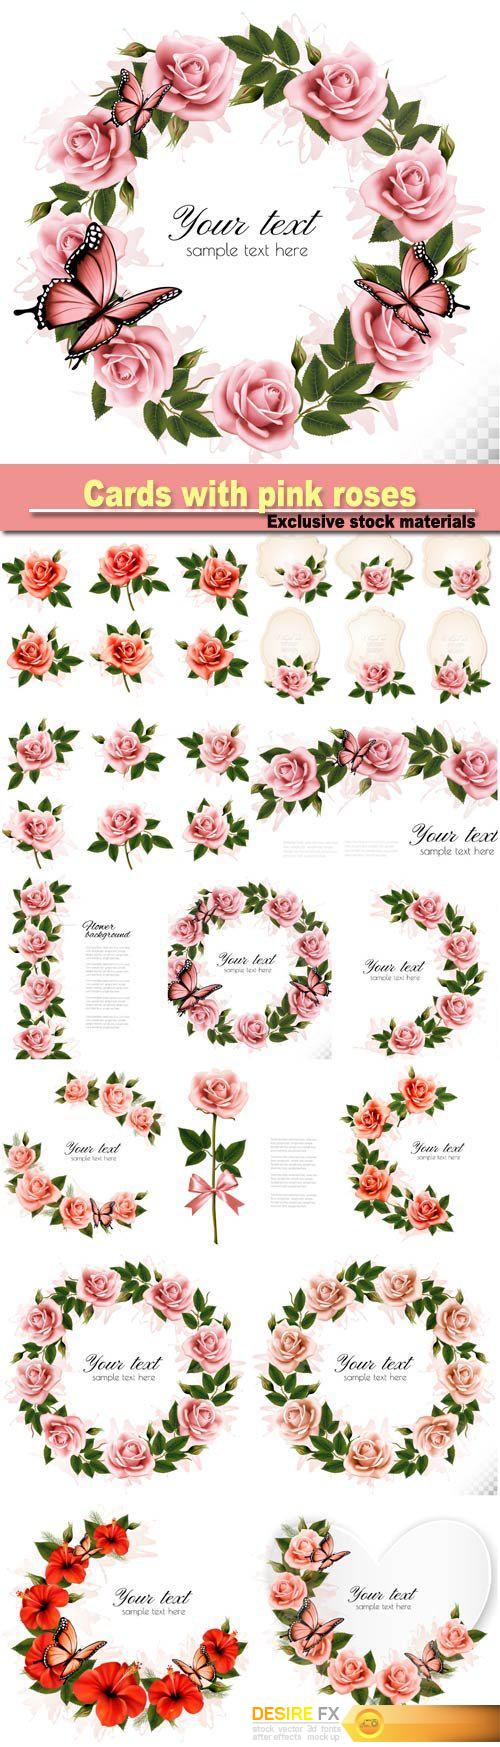 Collection of retro greeting cards with pink roses